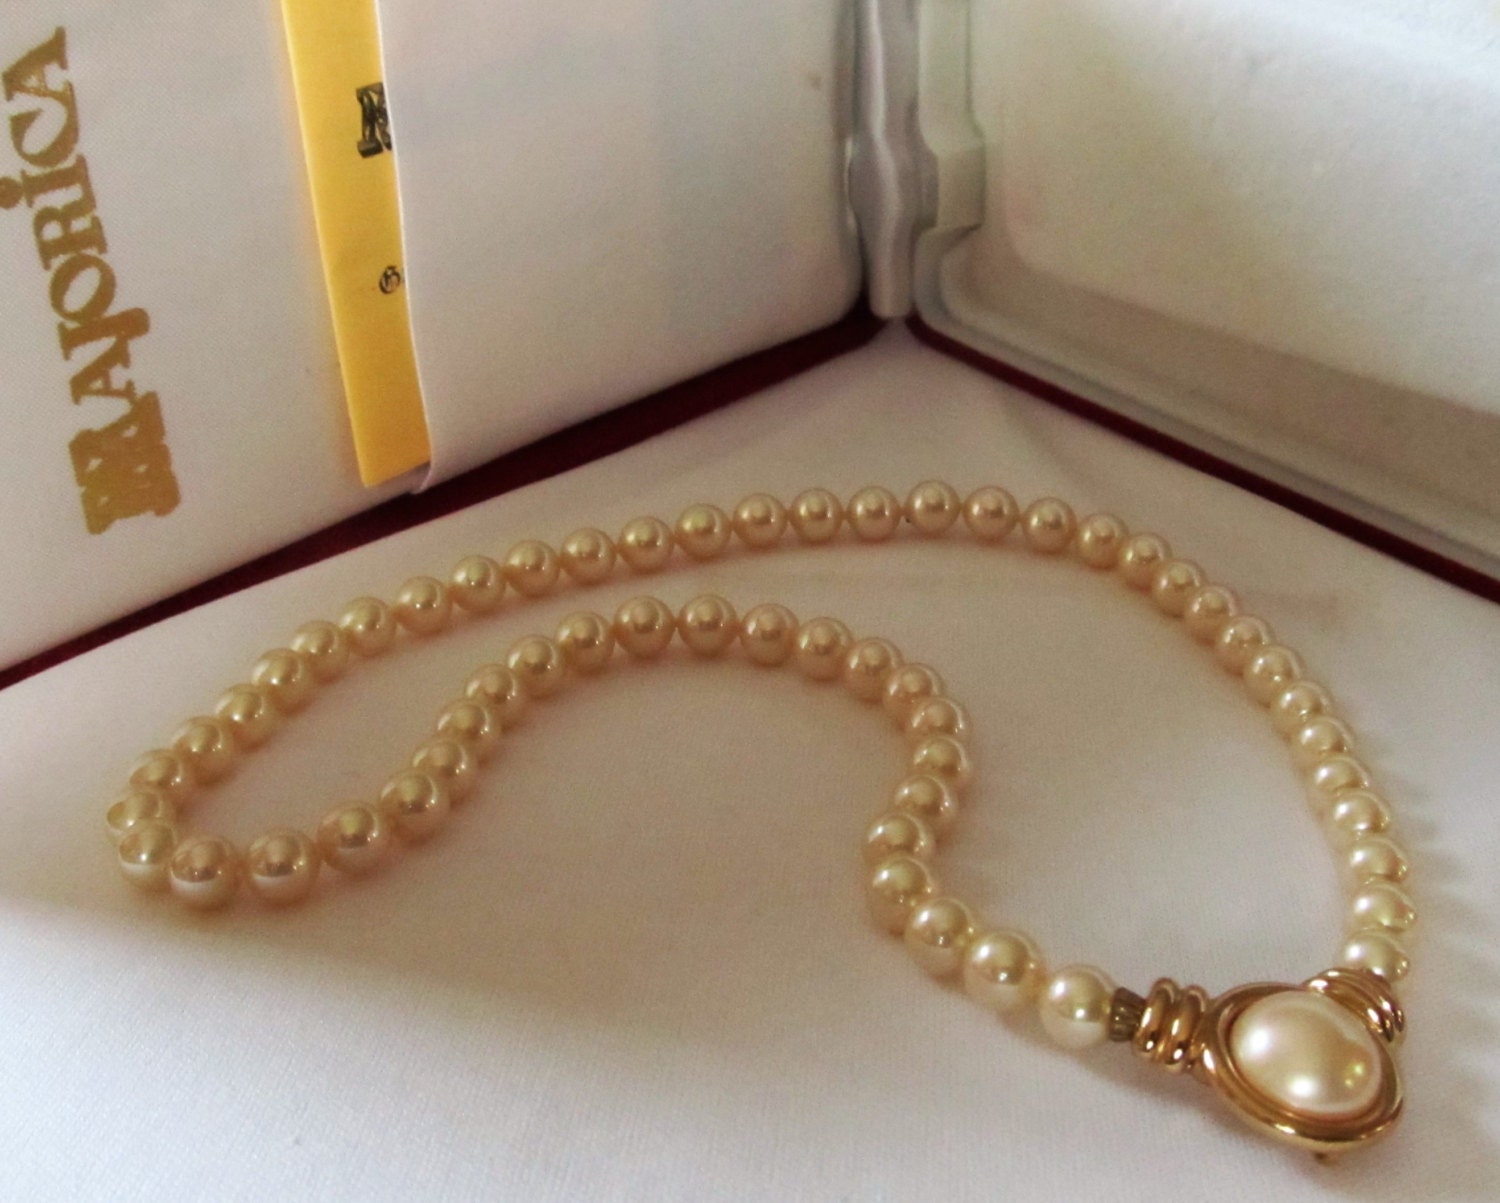 Majorica Pearl Necklace with a Center Front Pearl Drop Clasp